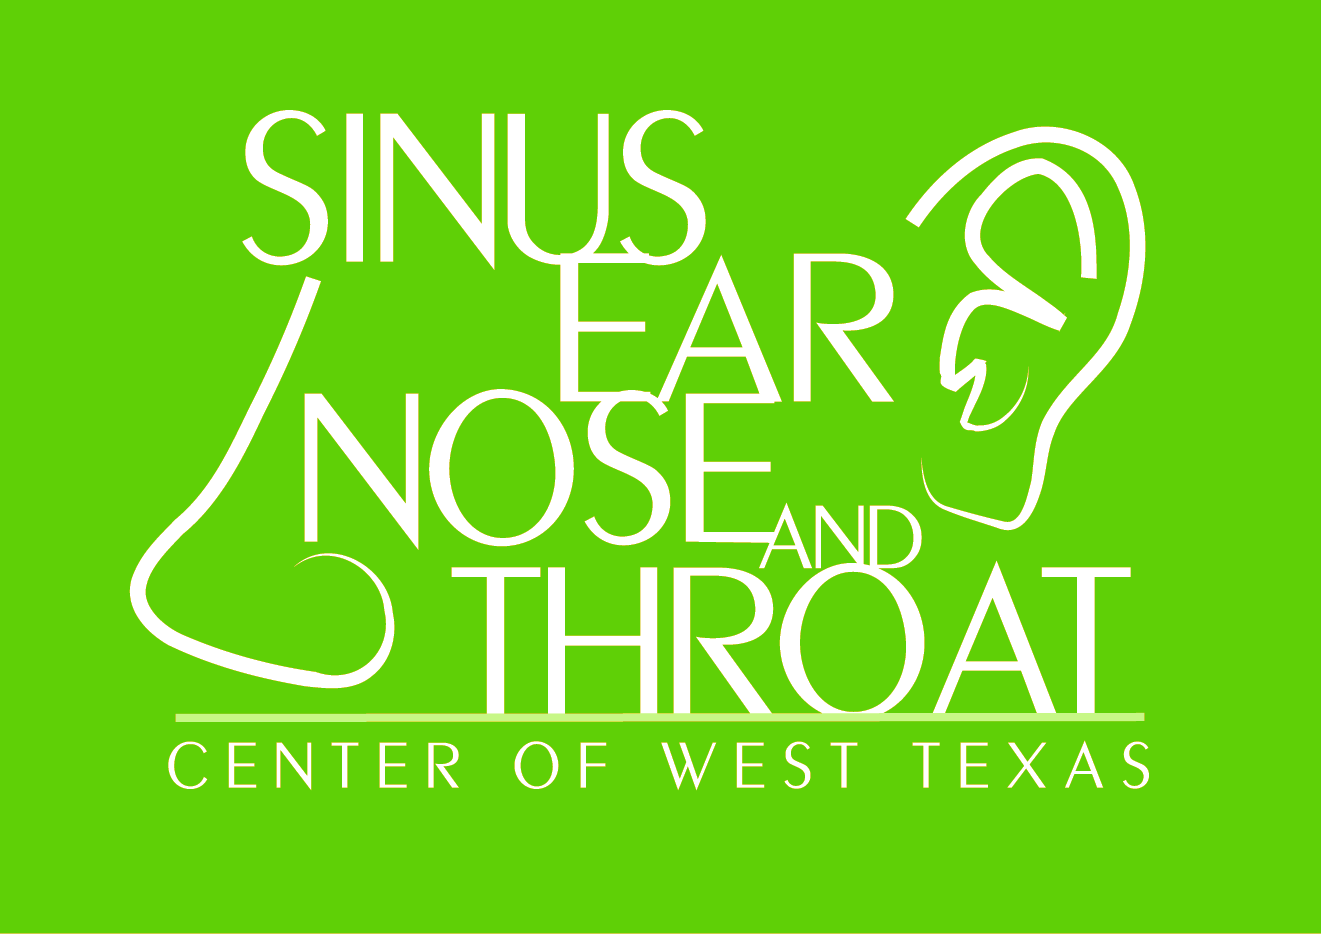 Sinus Ear Nose and Throat Center of West Texas